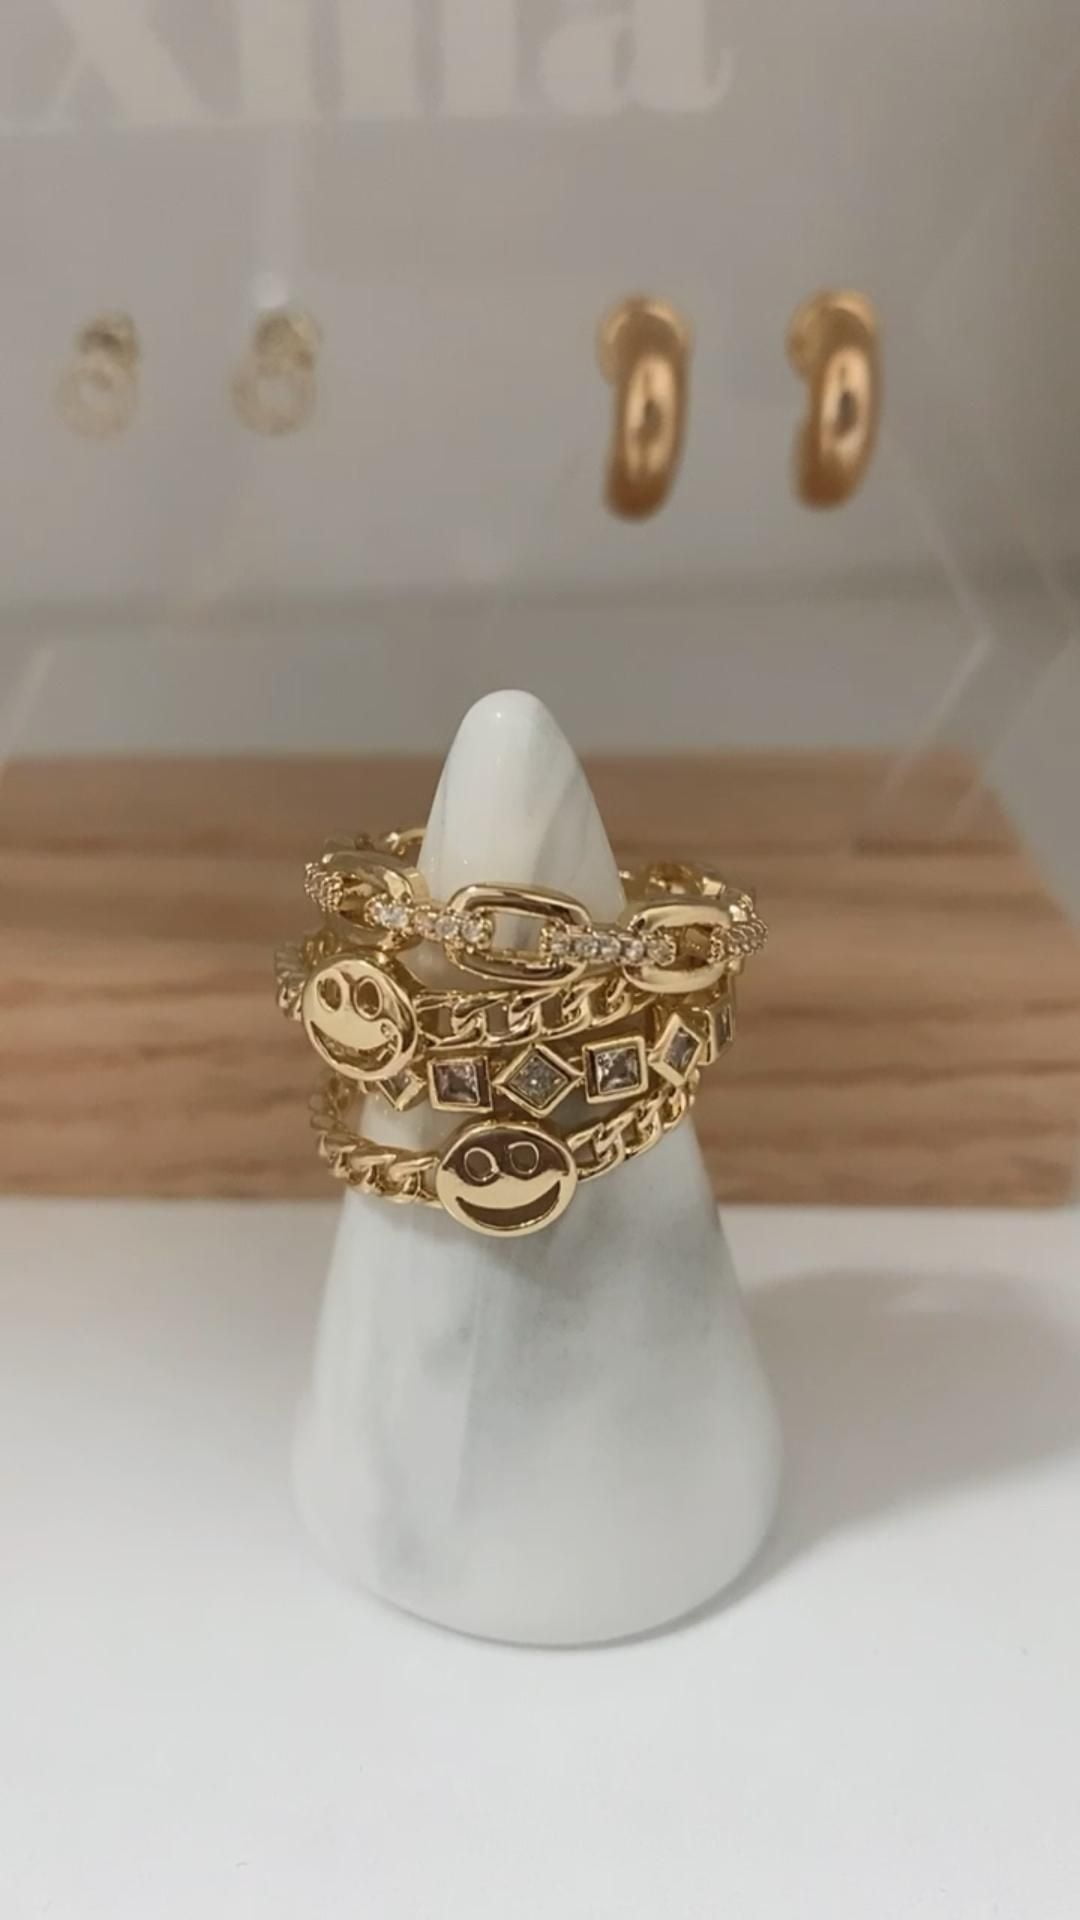 How To Make Gold Jewelry At Home